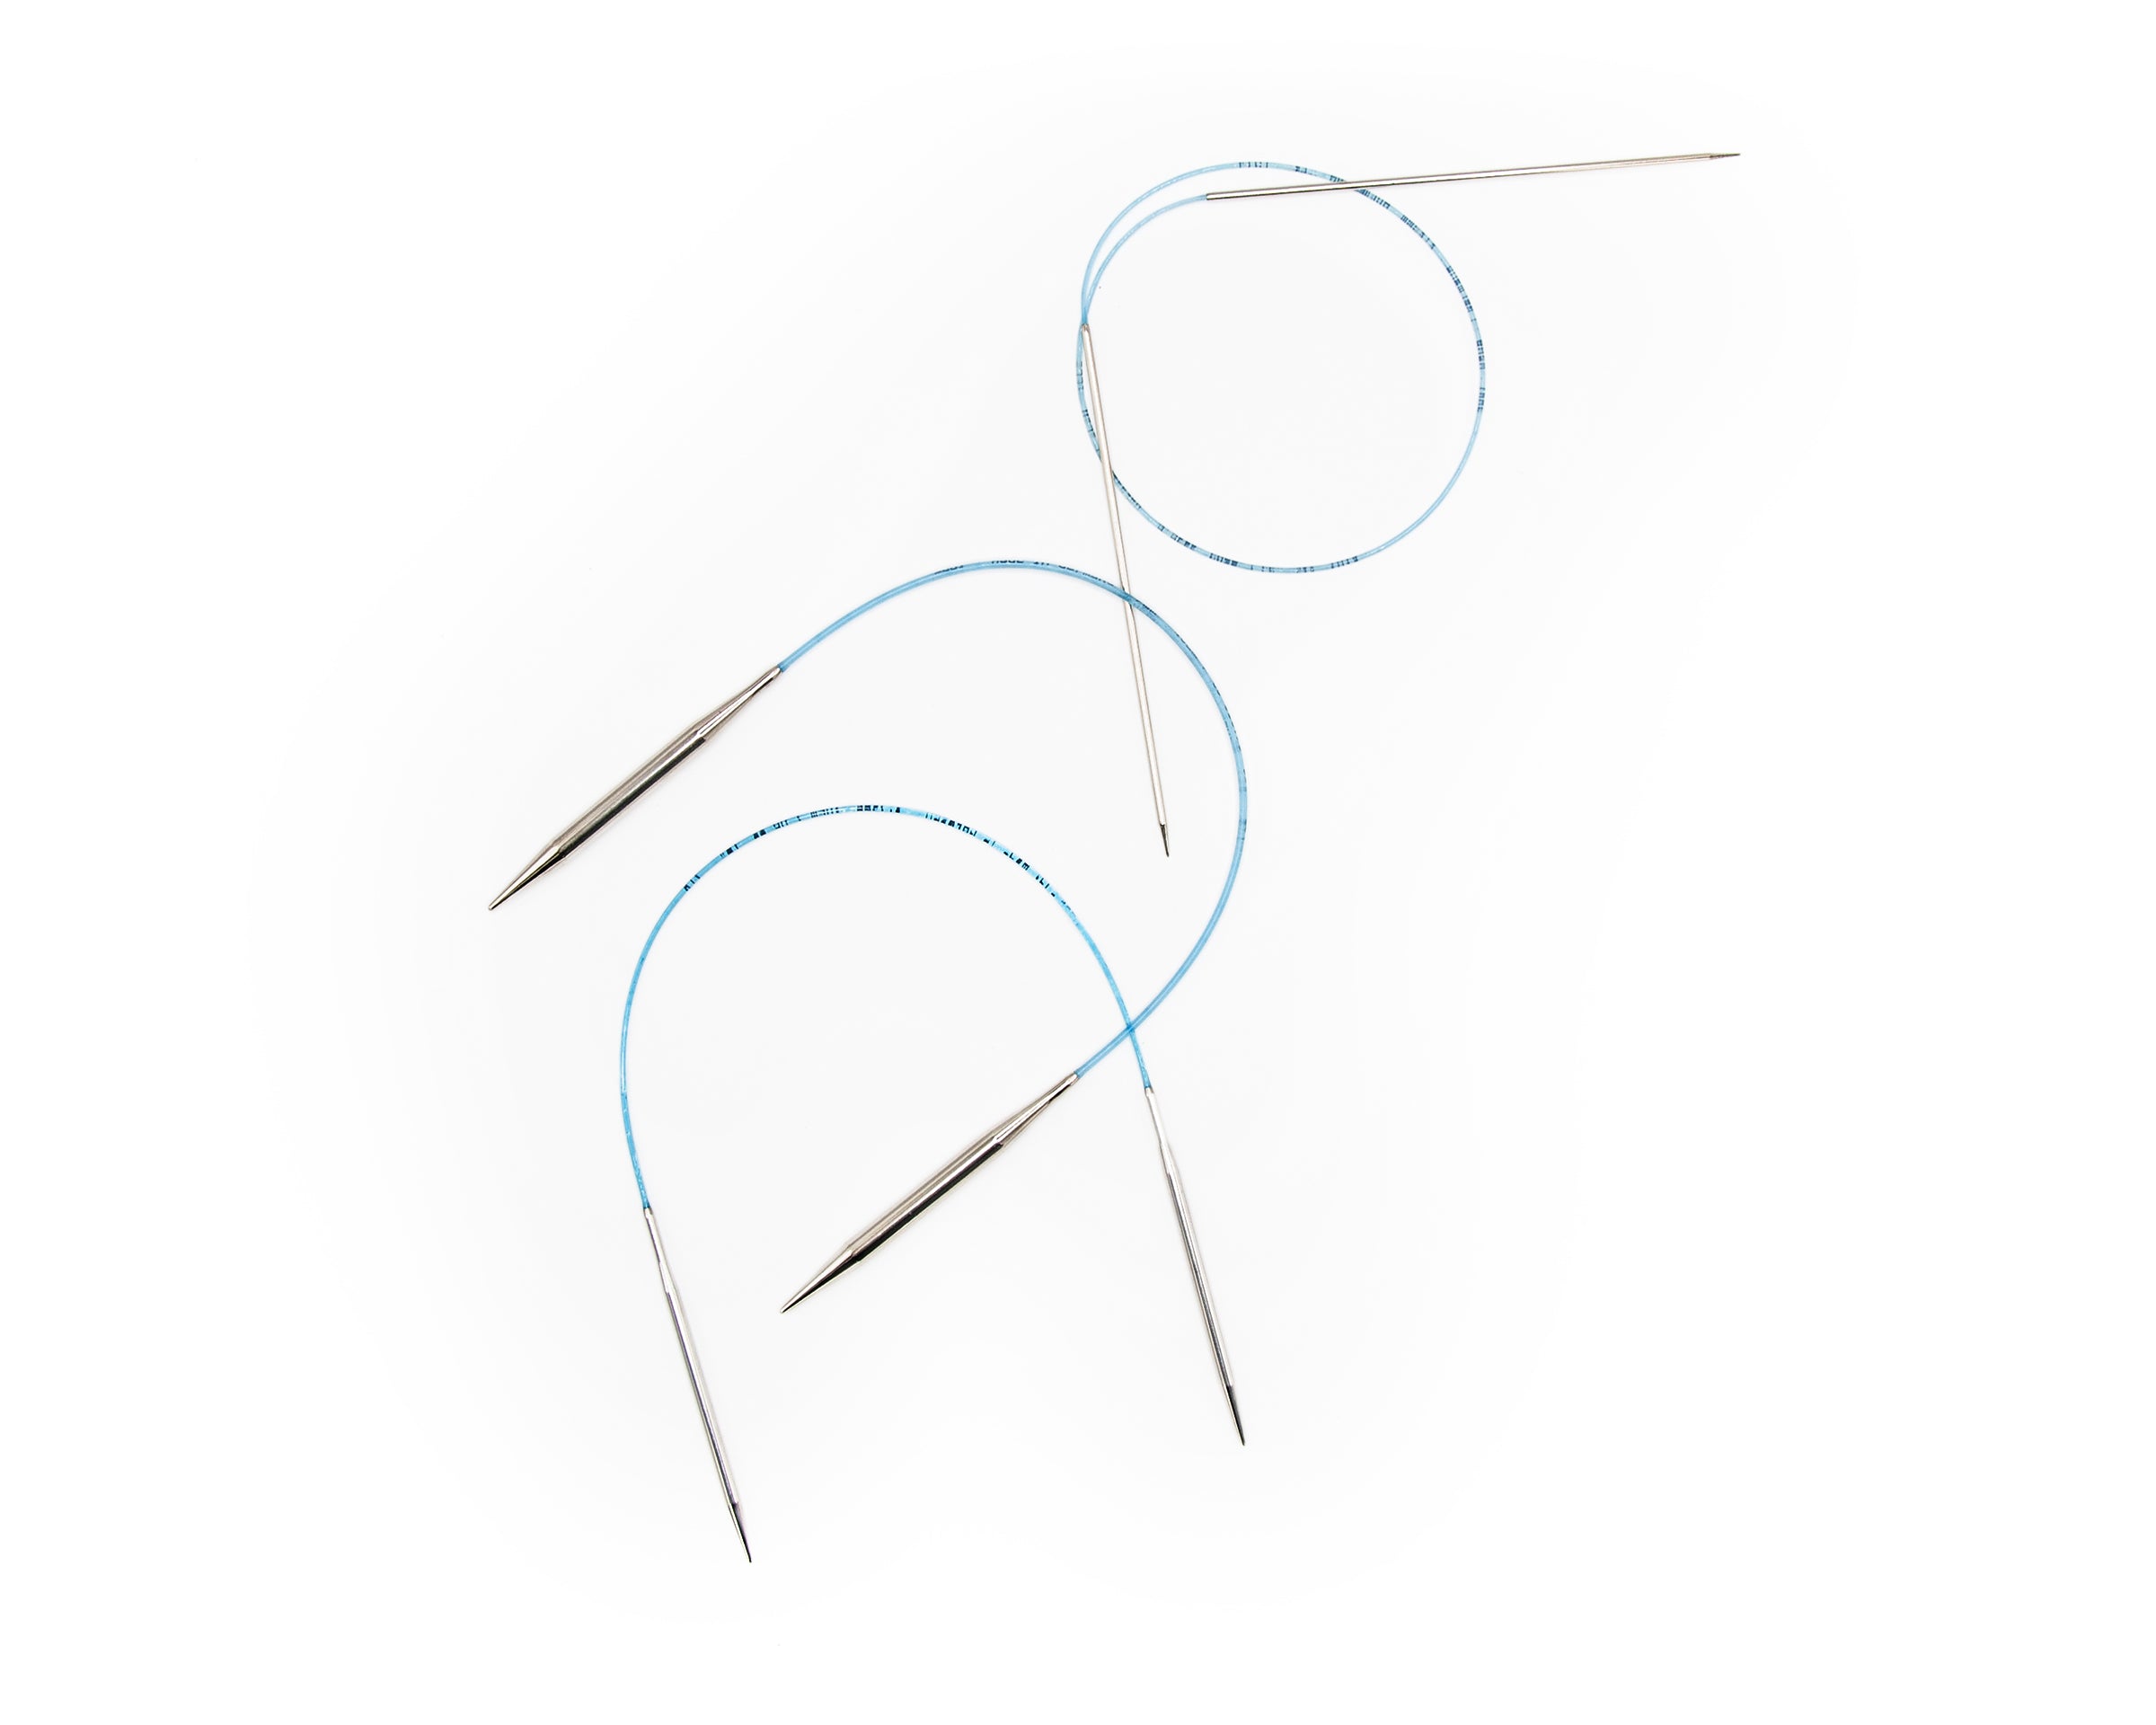 Addi Turbo Circular Knitting Needles 32 Inches - The Websters